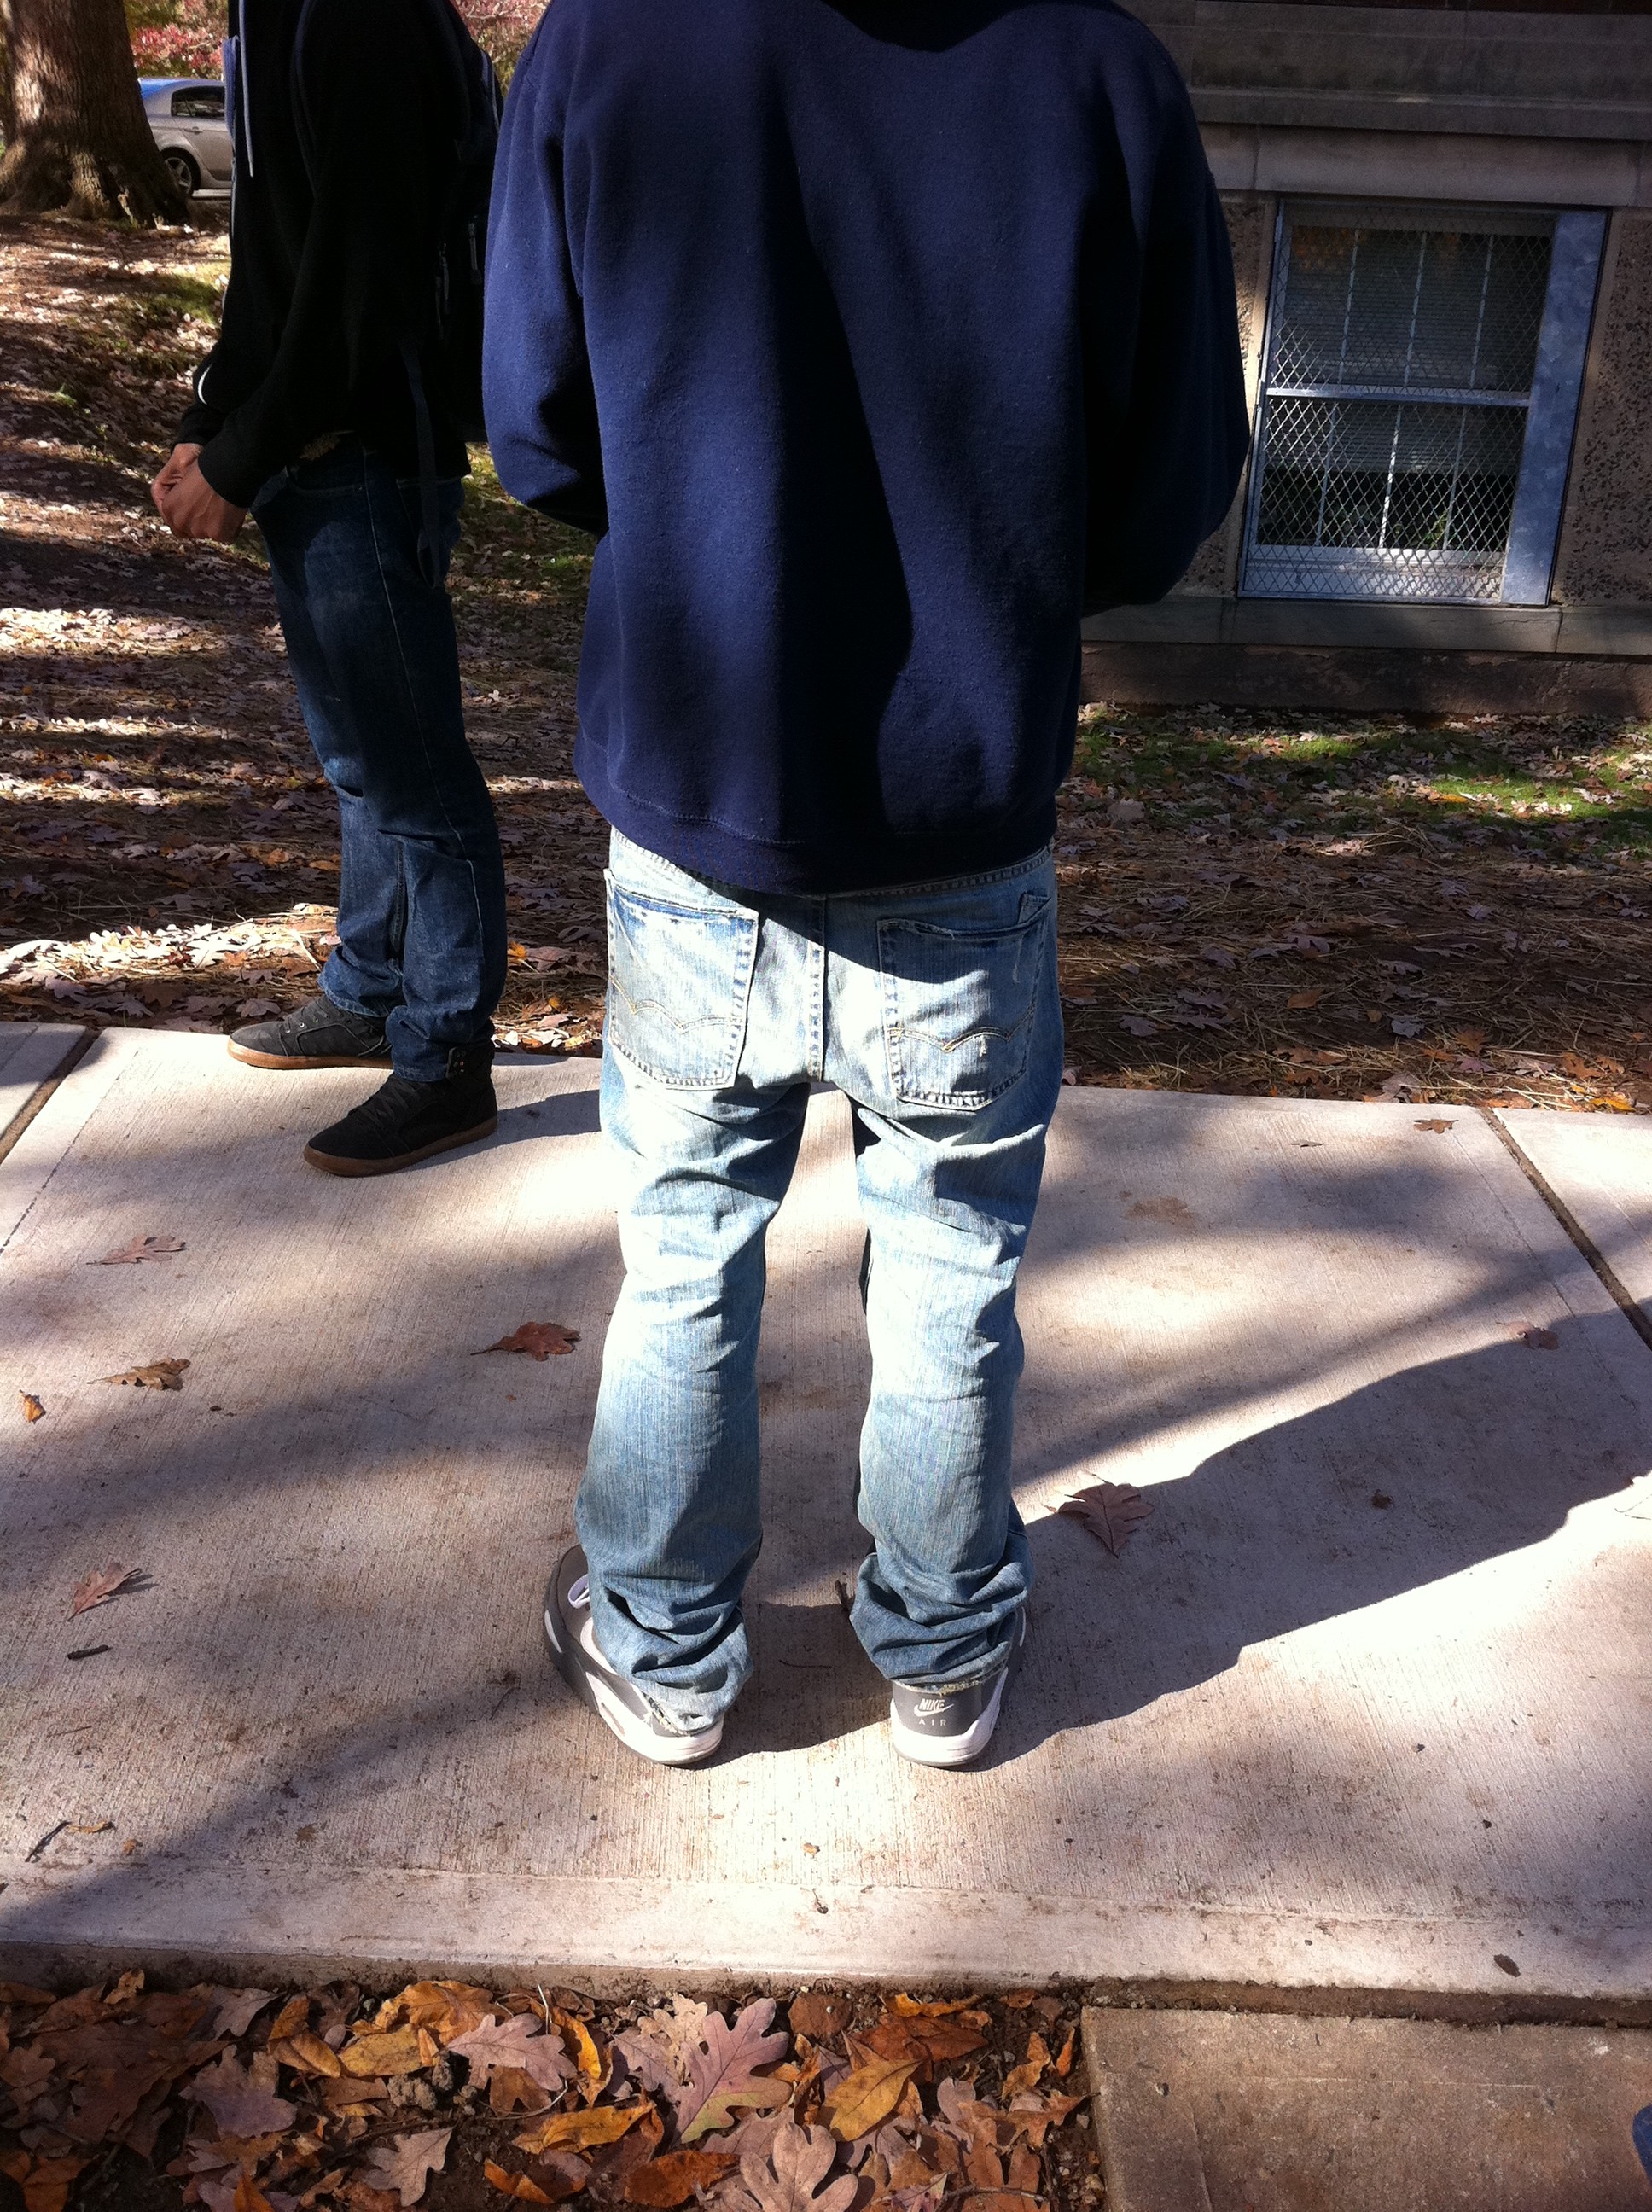 Nagging about Sagging: Girls Really Think Bull